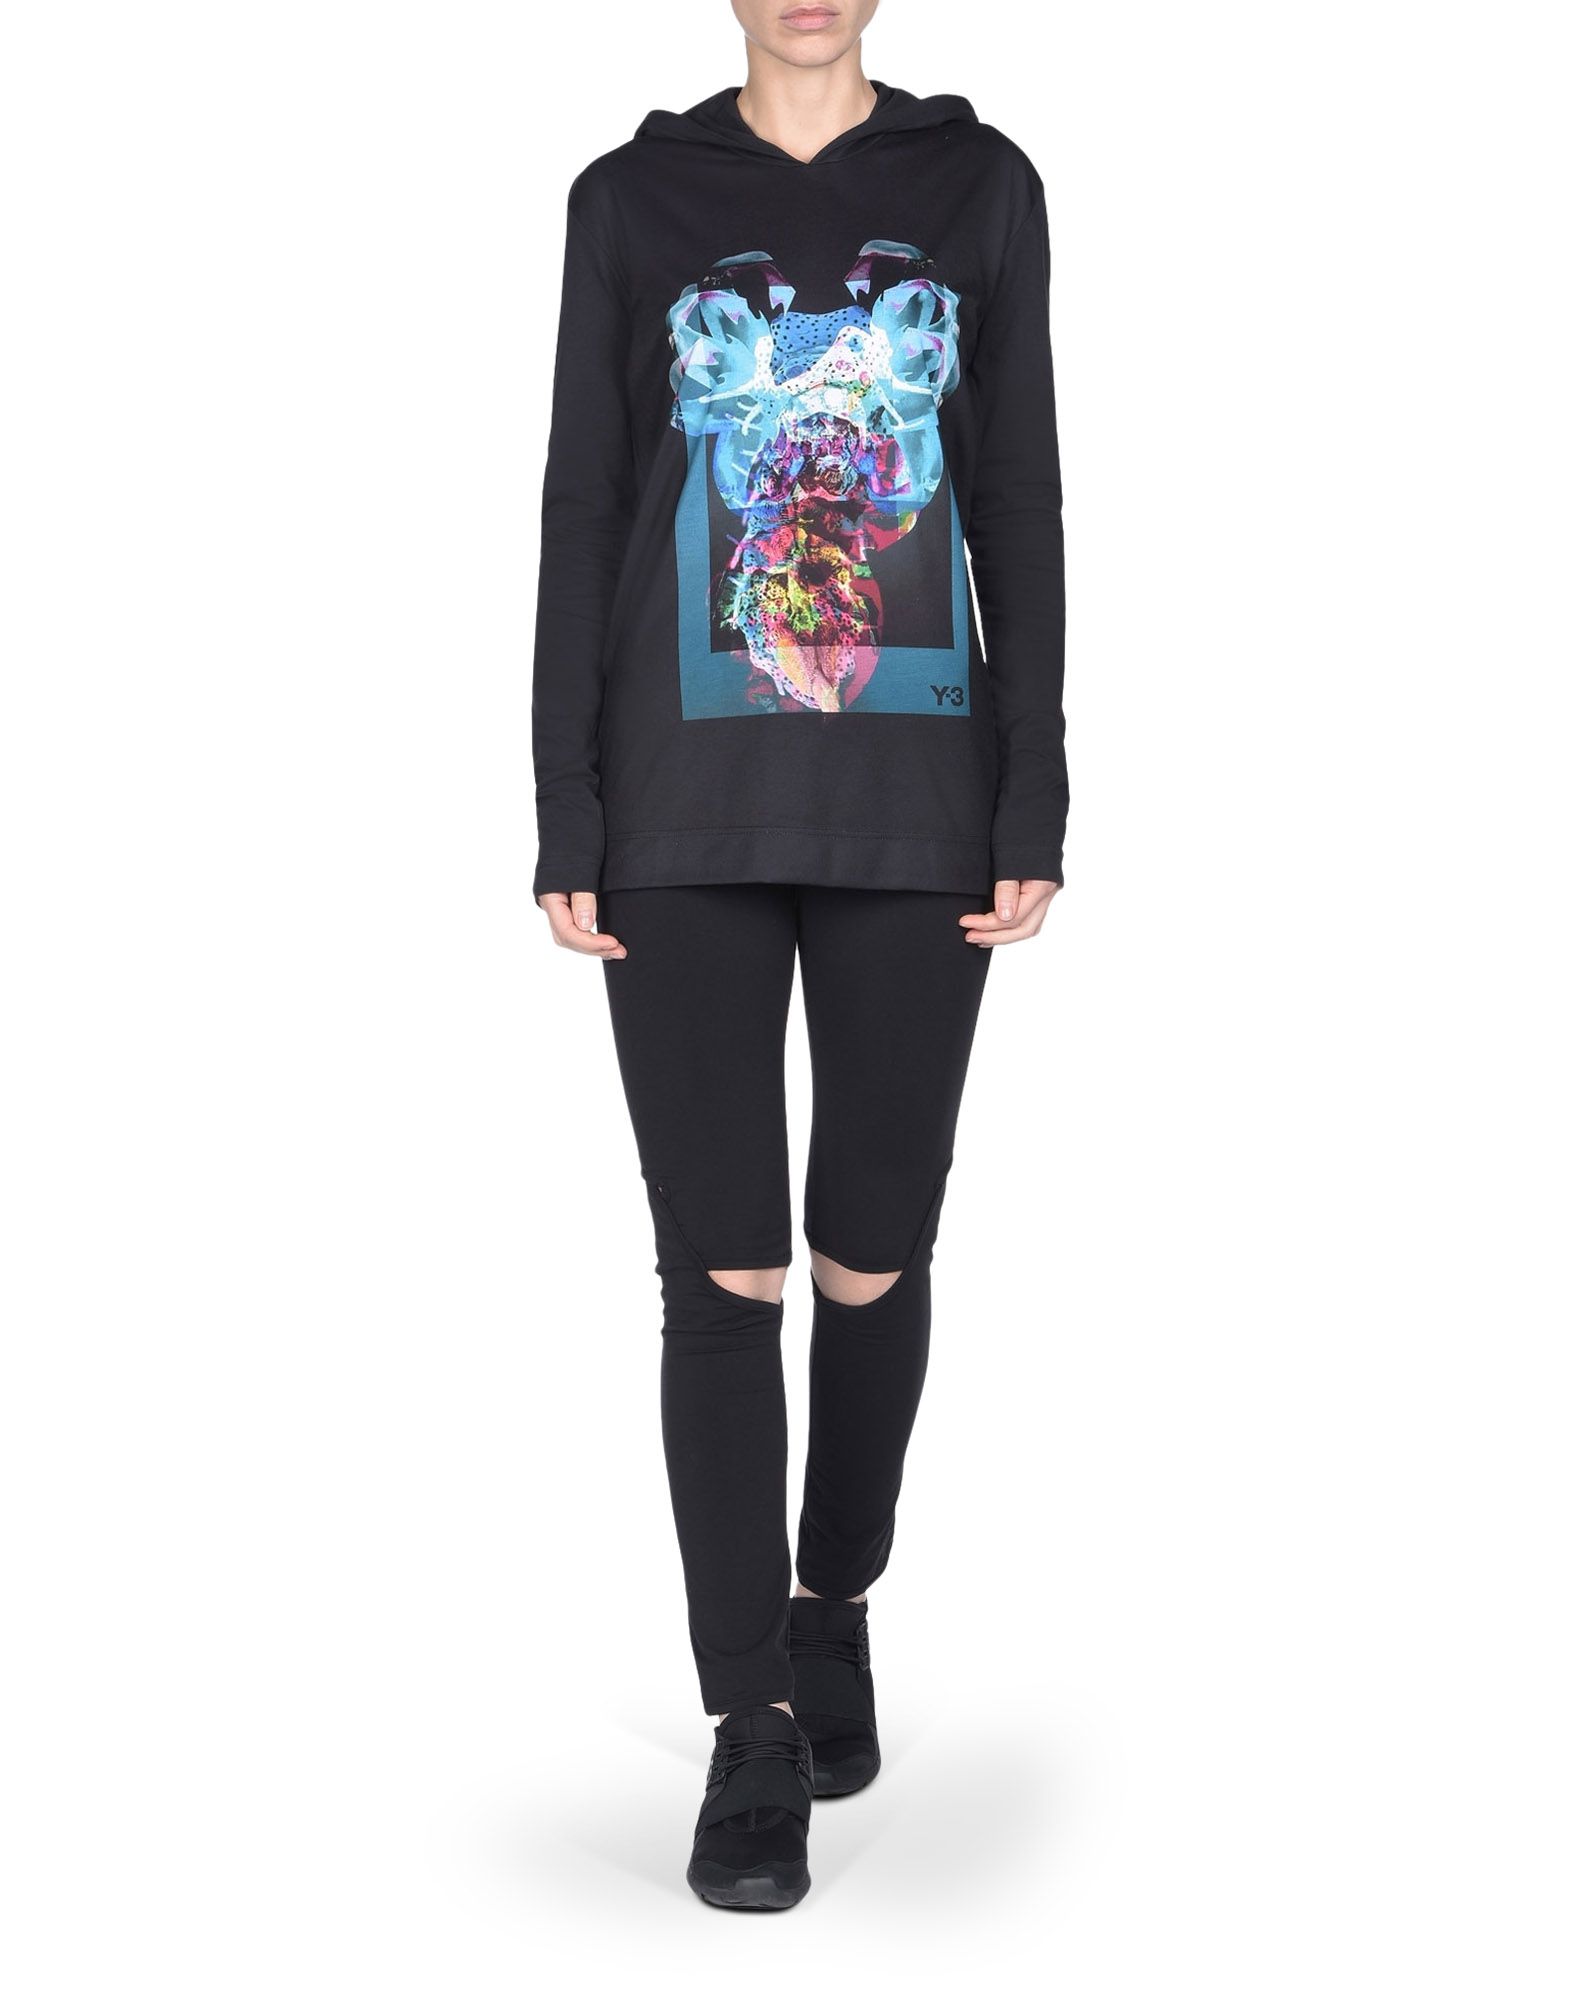 Y 3 ALIEN GRAPHIC SWEATER for Women | Adidas Y-3 Official Store